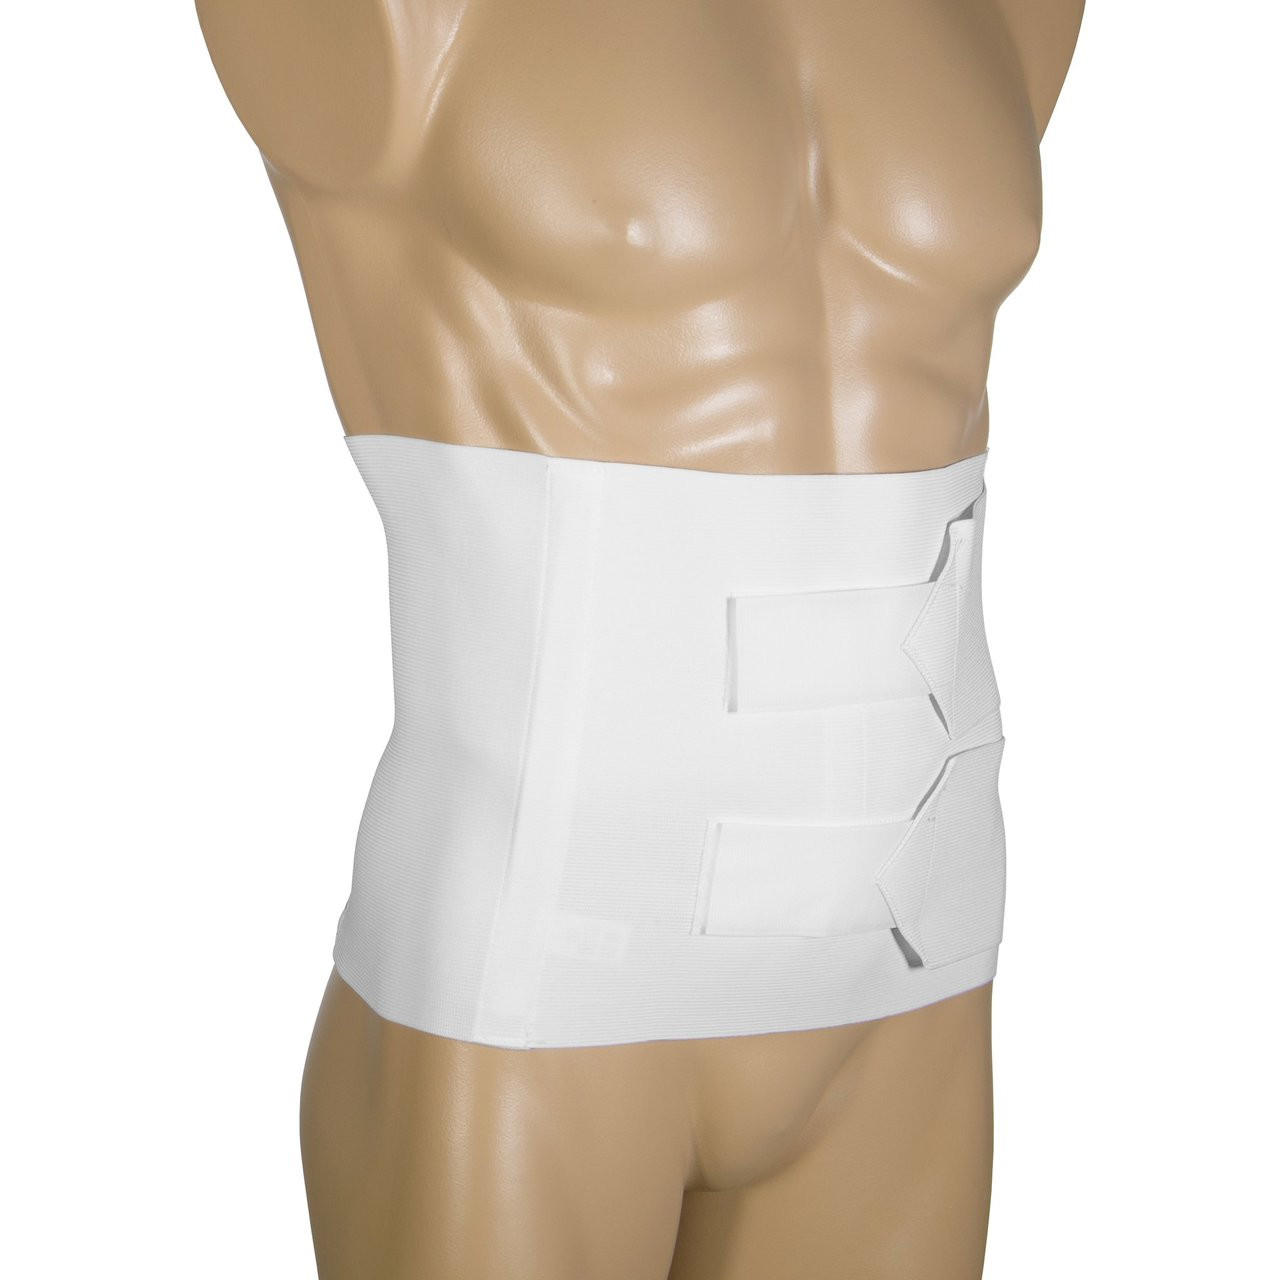 Abdominal support, side hook-and-pile closure, 10" elastic S-M-L-XL-2XL (0516) (516)